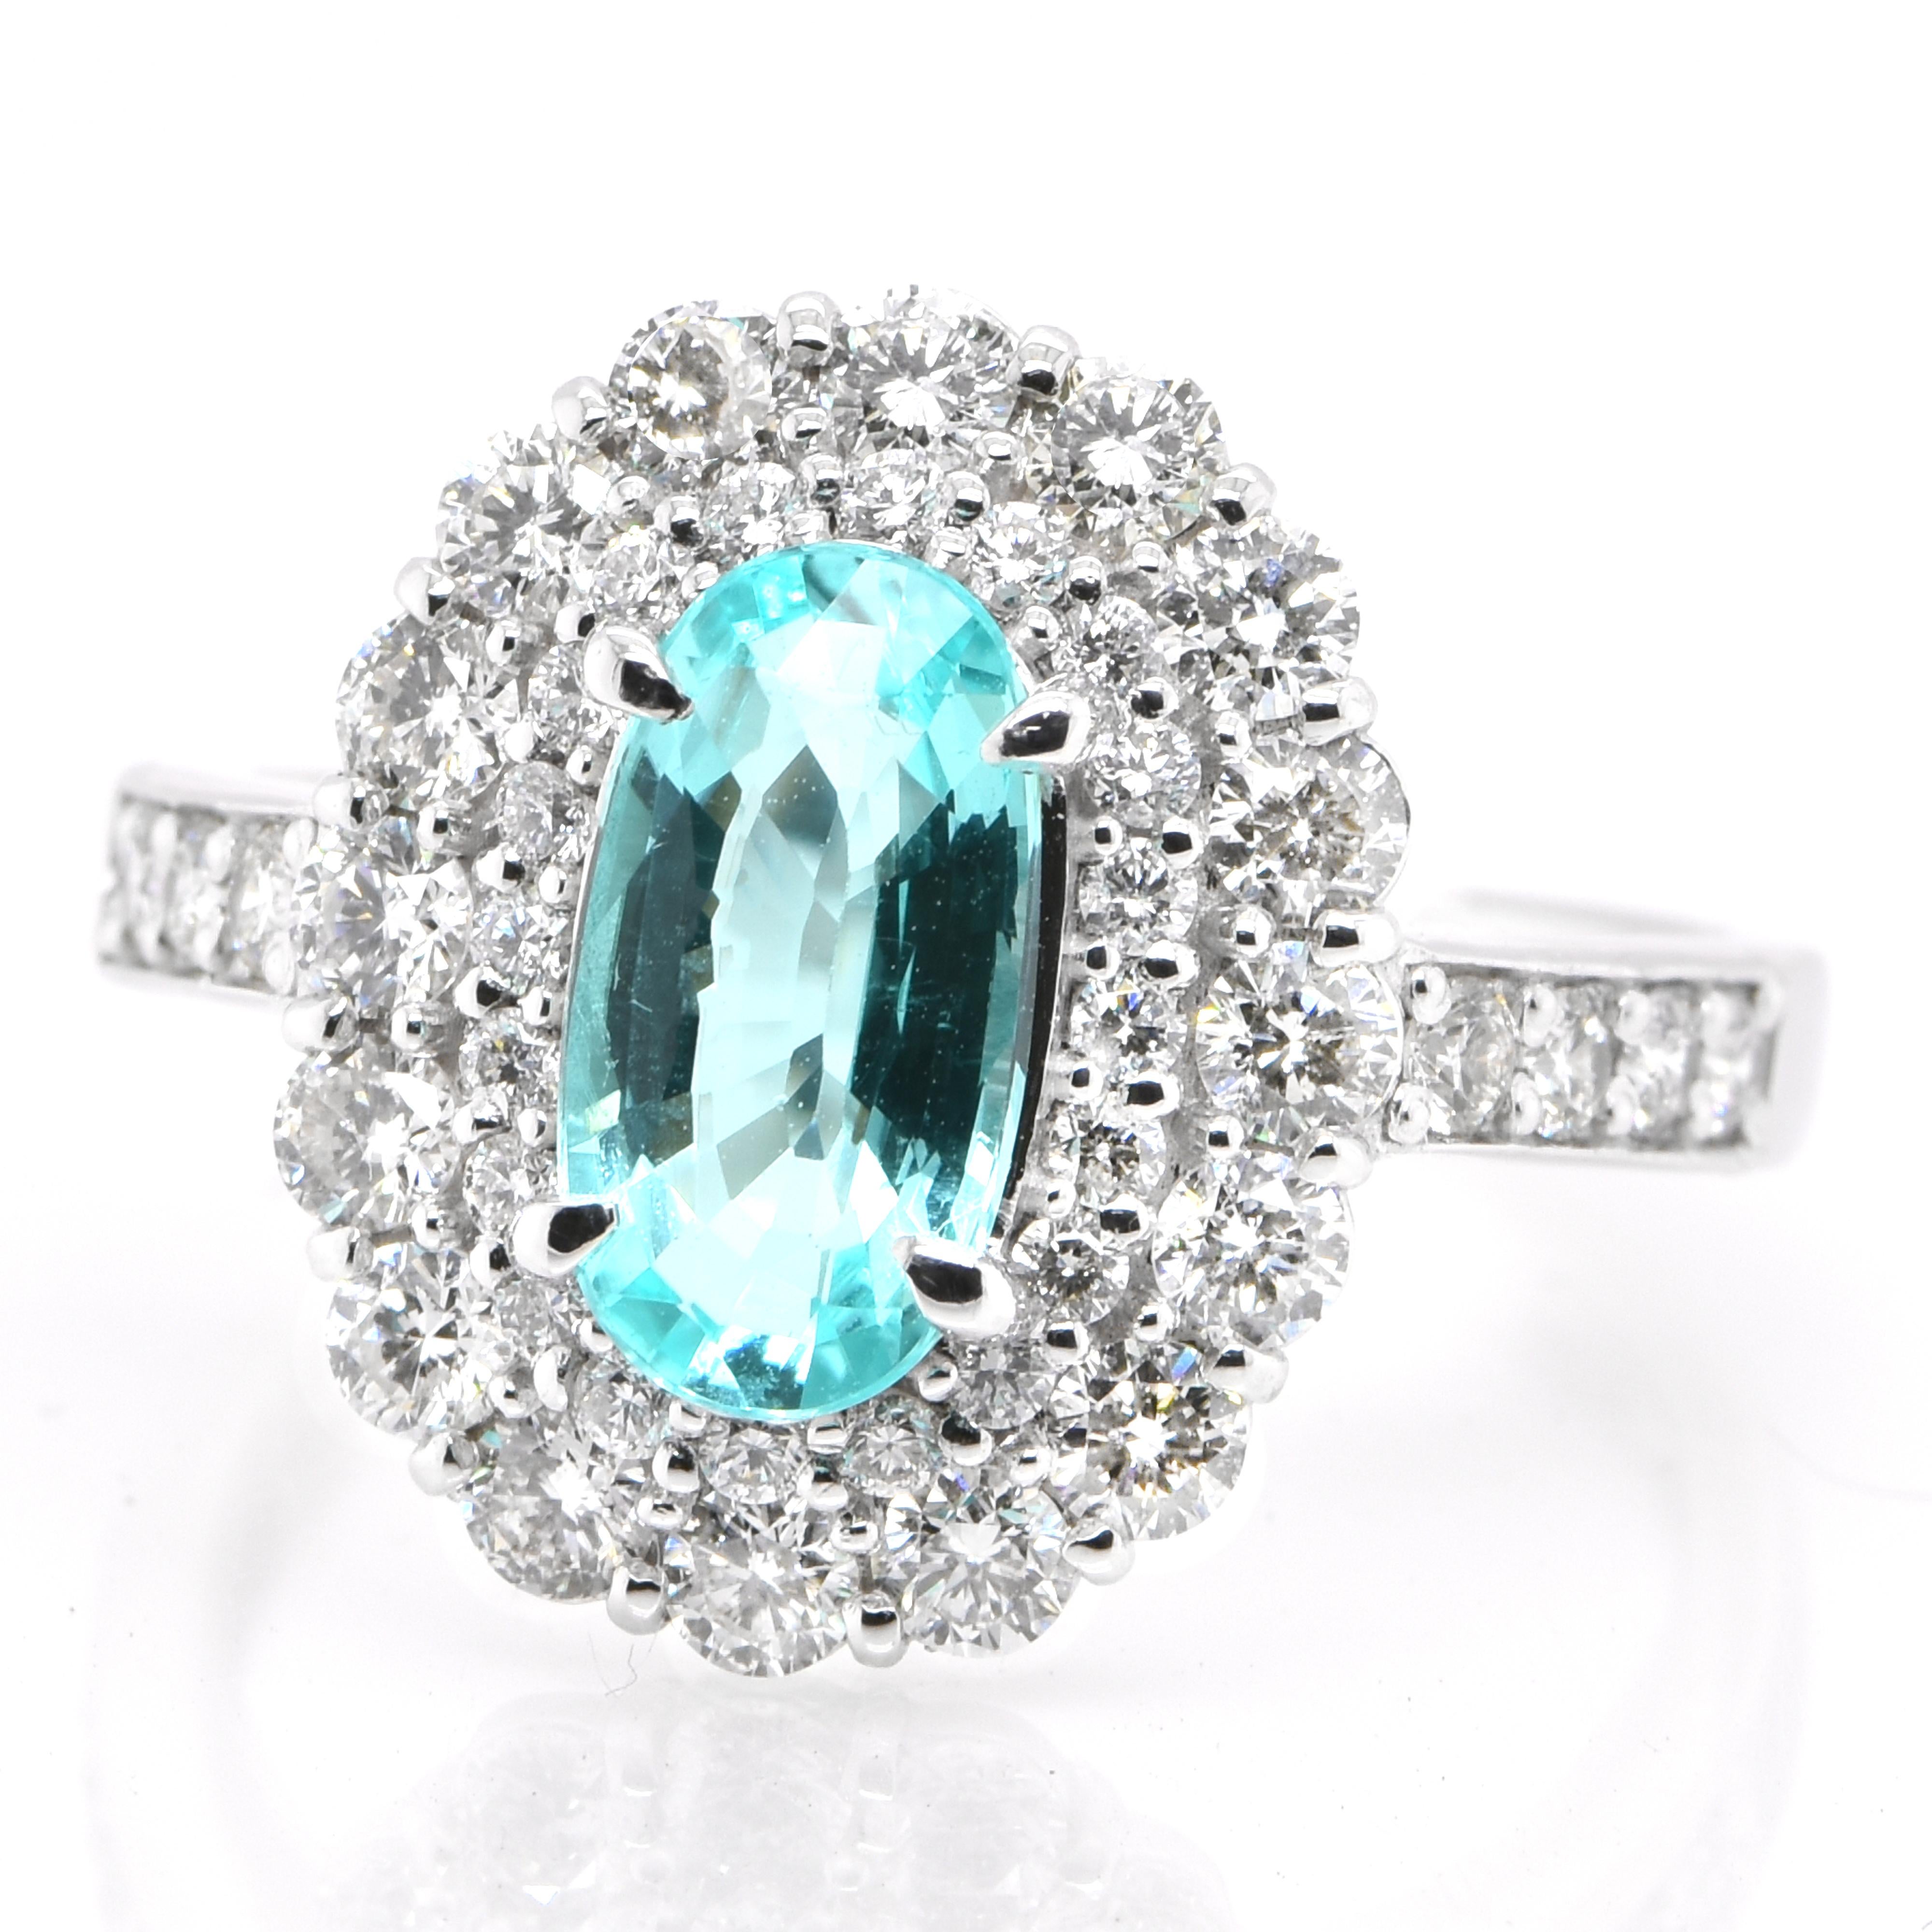 A beautiful ring featuring a GIA Certified 1.19 Carat Natural Mozambican (South East Africa) Paraiba Tourmaline and 1.05 Carats of Diamond Accents set in Platinum. Paraiba Tourmalines were only discovered 30 years ago in the Brazilian state of the